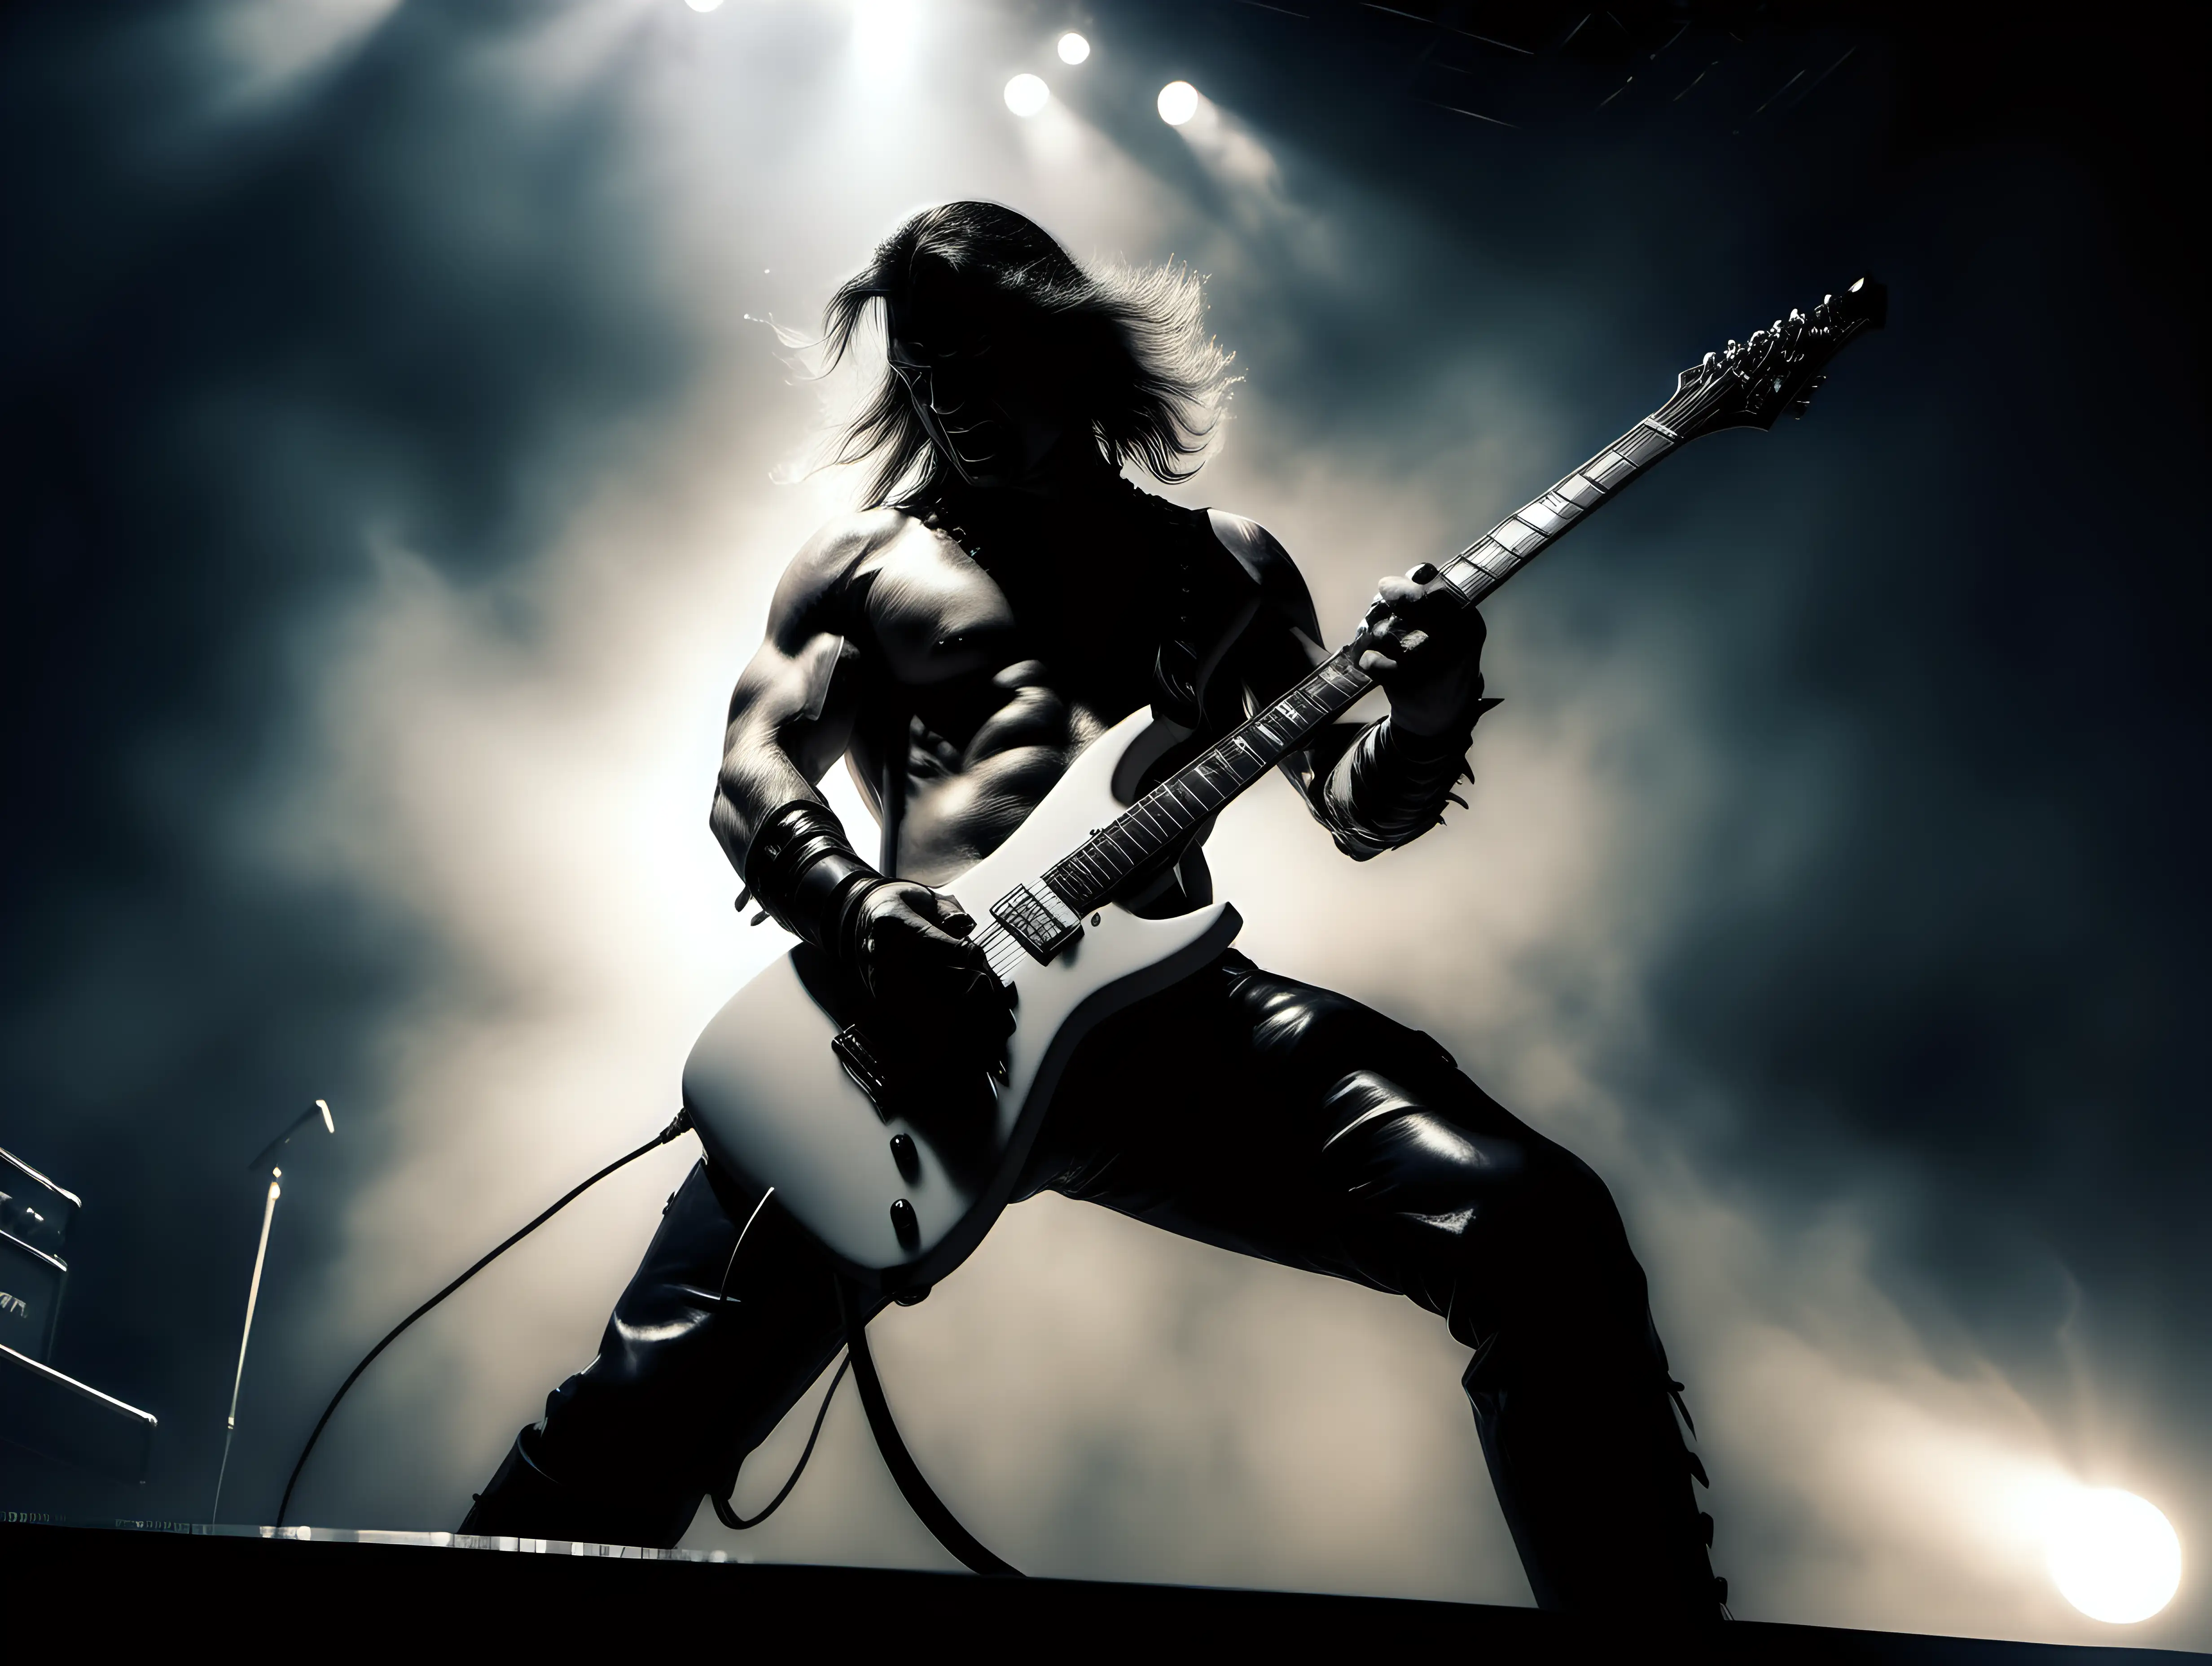 Heavy metal guitarist soloing on stage with white light coming from behind  Frank Frazetta style